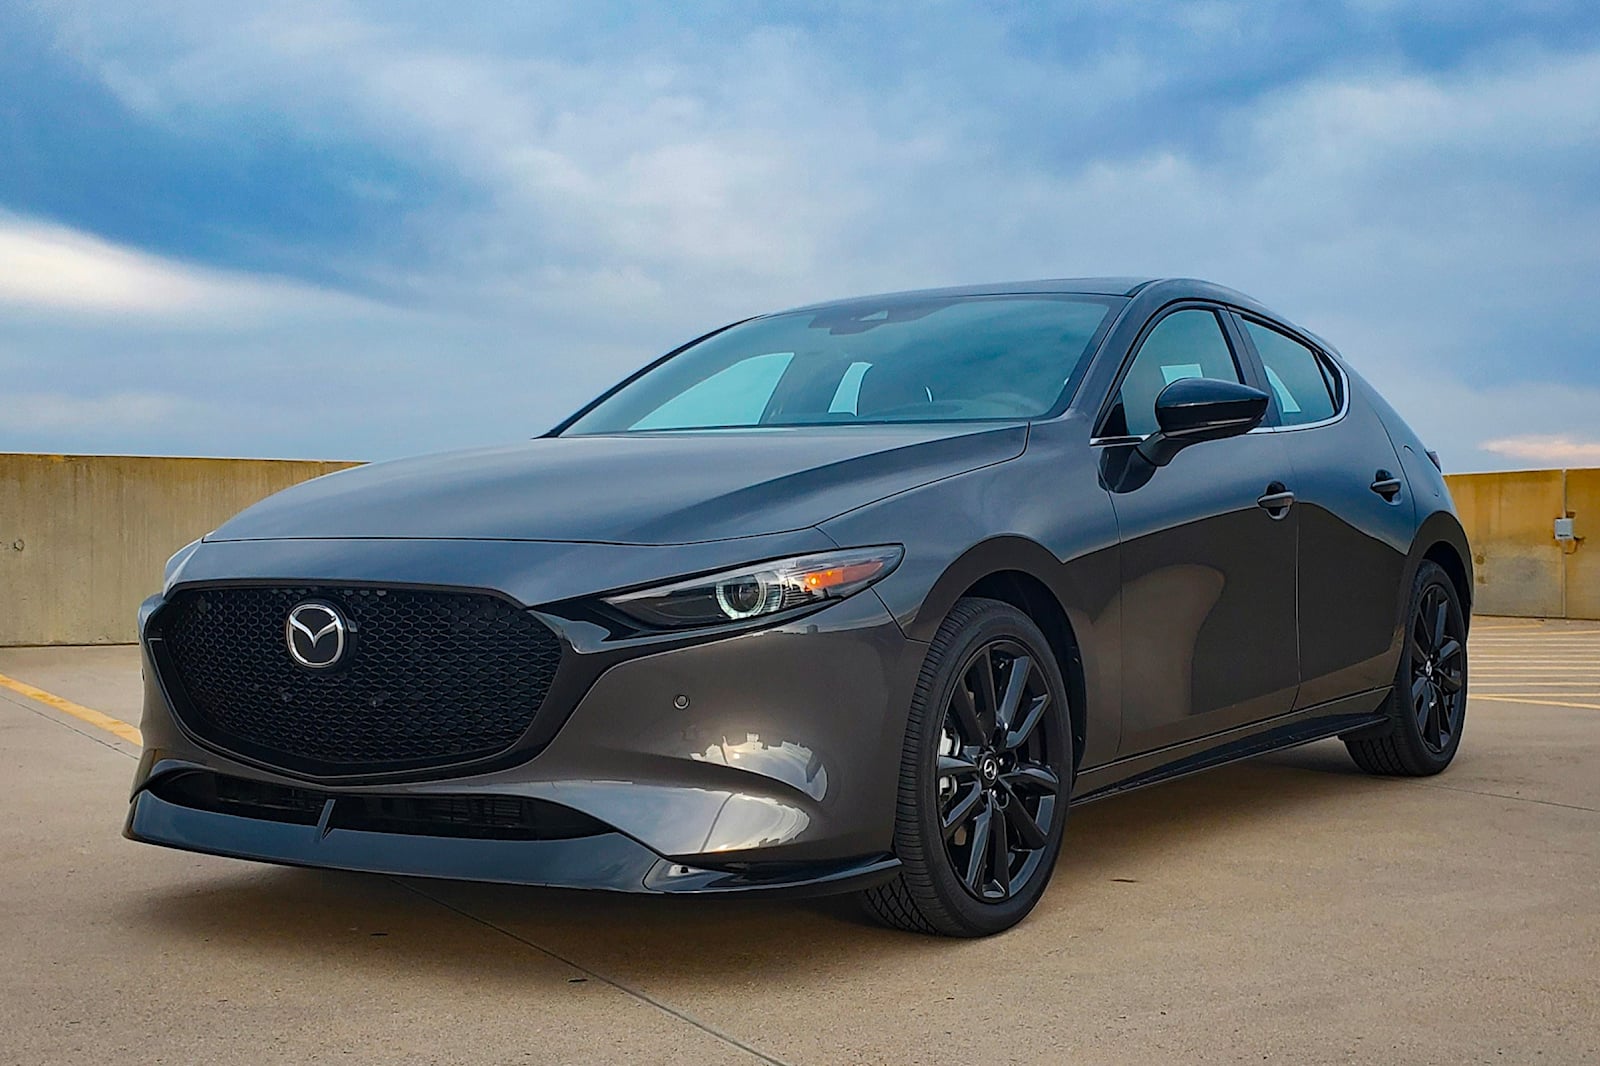 2020 Mazda3 Hatchback Review: Quite Possibly All The Car You'll Ever Need